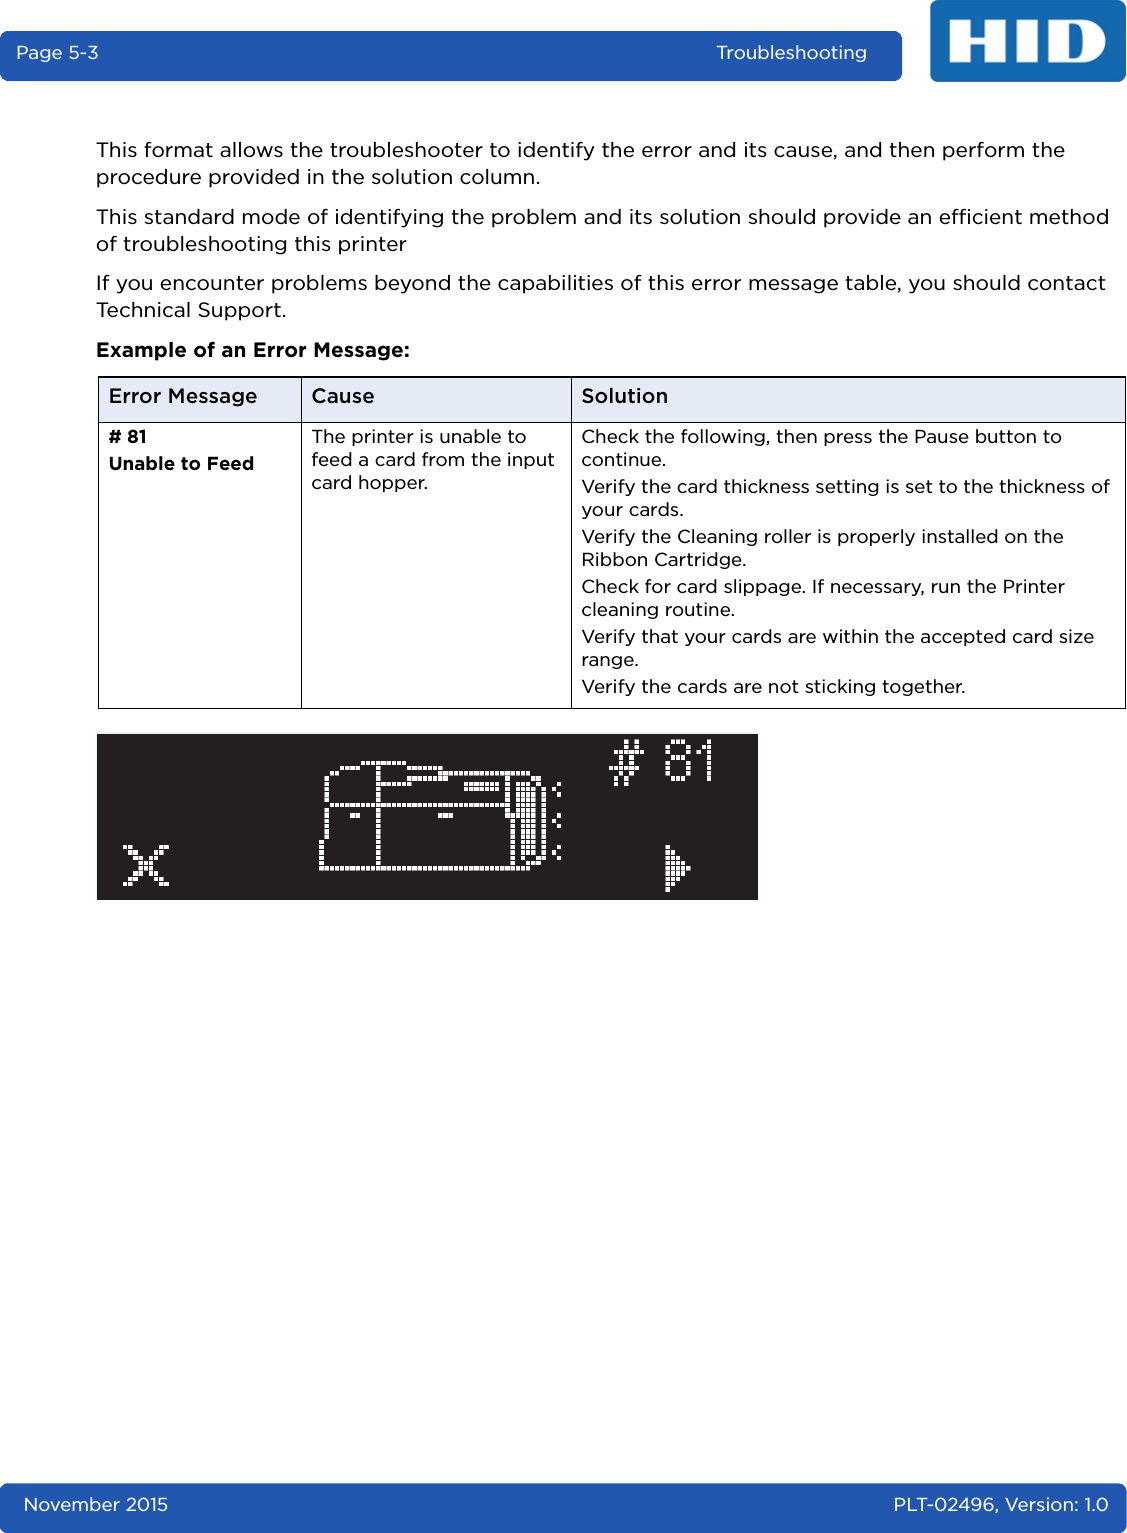 November 2015 PLT-02496, Version: 1.0Page 5-3 TroubleshootingThis format allows the troubleshooter to identify the error and its cause, and then perform the procedure provided in the solution column.This standard mode of identifying the problem and its solution should provide an efficient method of troubleshooting this printer If you encounter problems beyond the capabilities of this error message table, you should contact Technical Support.Example of an Error Message:Error Message Cause Solution# 81Unable to FeedThe printer is unable to feed a card from the input card hopper.Check the following, then press the Pause button to continue.Verify the card thickness setting is set to the thickness of your cards.Verify the Cleaning roller is properly installed on the Ribbon Cartridge.Check for card slippage. If necessary, run the Printer cleaning routine.Verify that your cards are within the accepted card size range.Verify the cards are not sticking together.